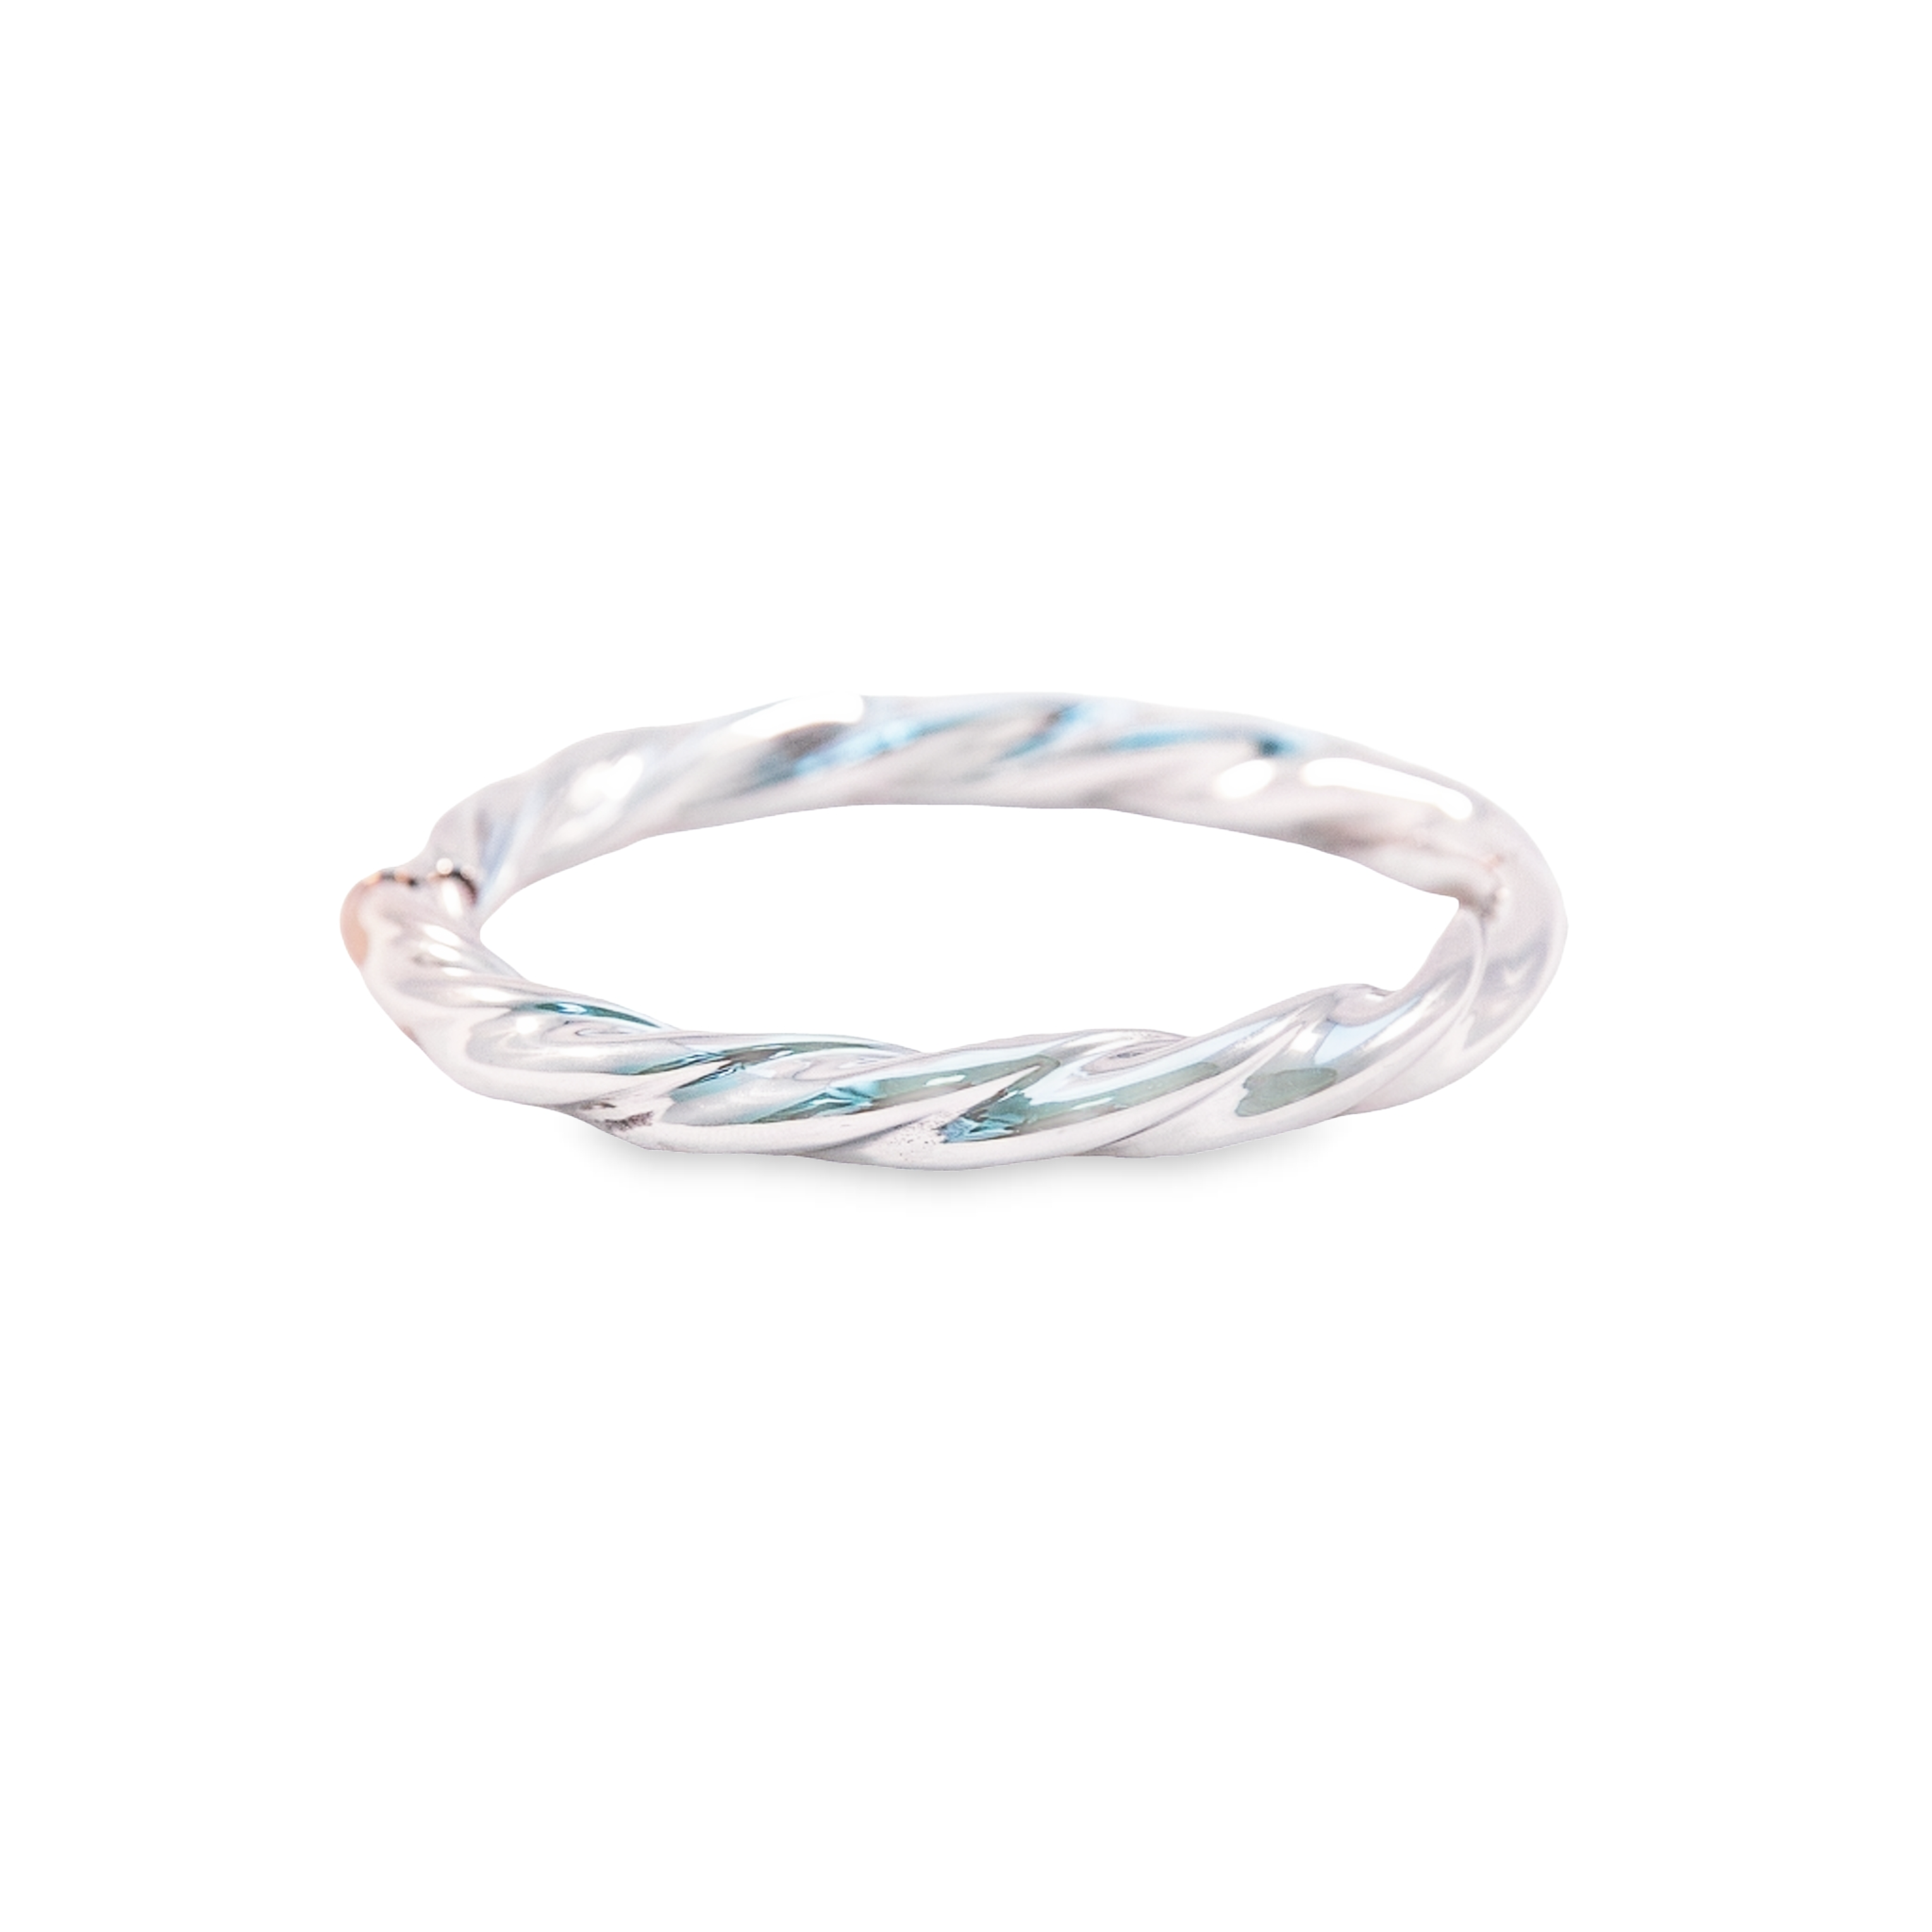 This White Gold Wide Twisted Bangle is the perfect accessory. Its twisted design adds texture and dimension to any look, while a comfortable and chunky design allows for all-day wear. Enjoy the sophistication of a luxury bangle without sacrificing comfort.